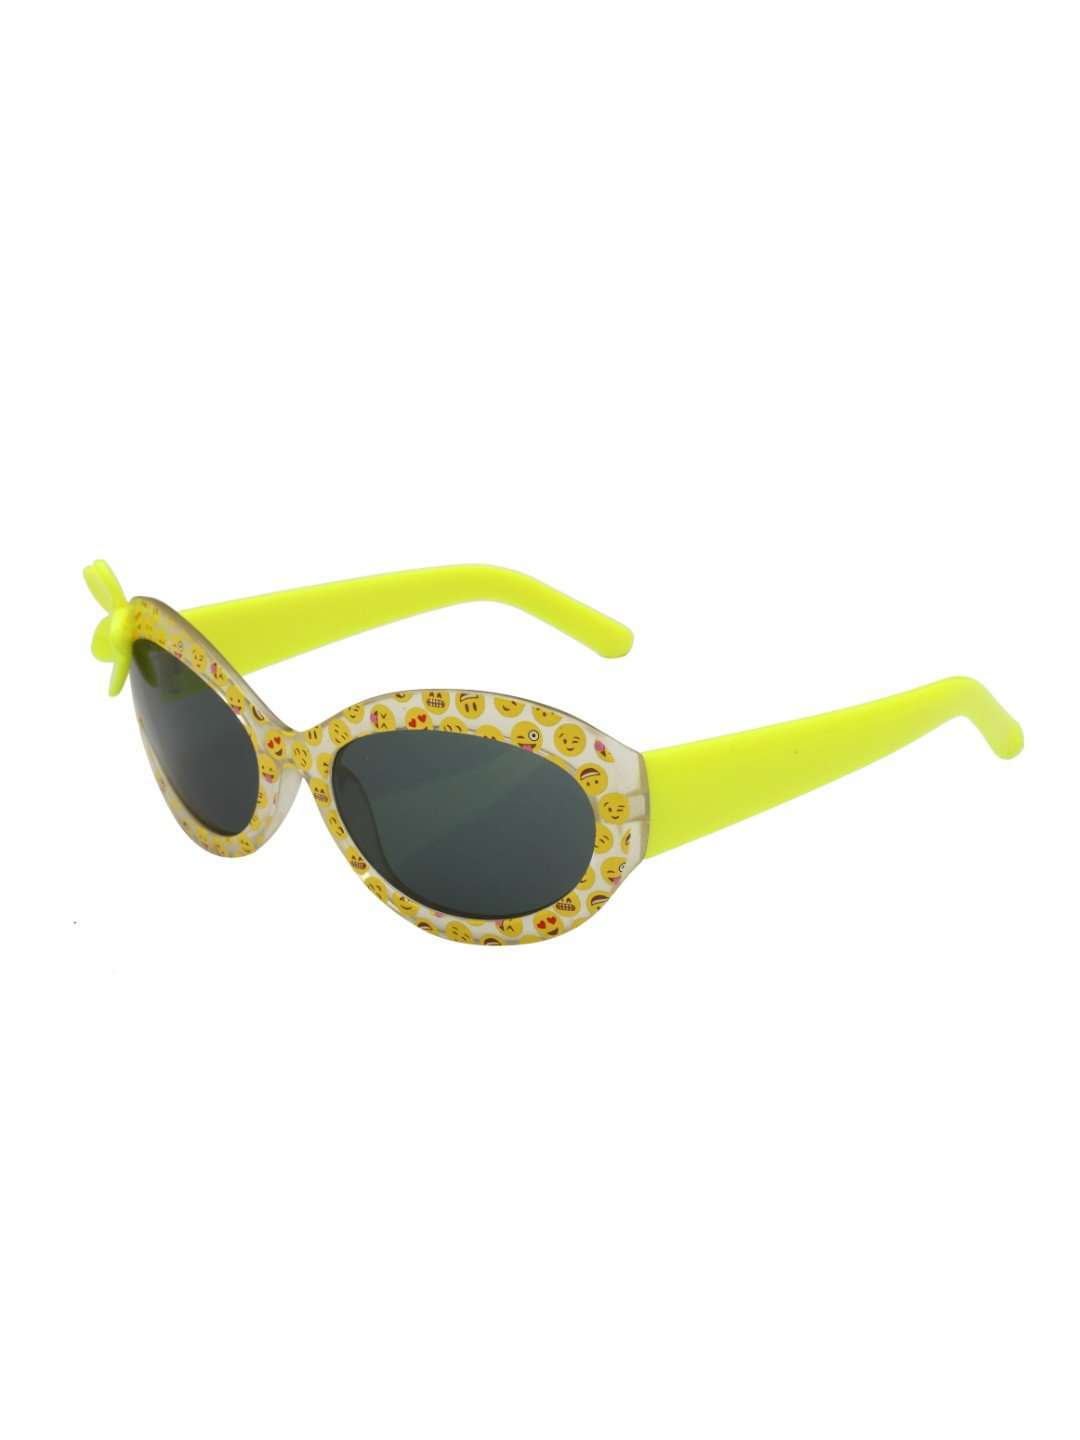 Stol'n Kids Yellow Printed Flower Applique Oval Sunglasses - SWHF